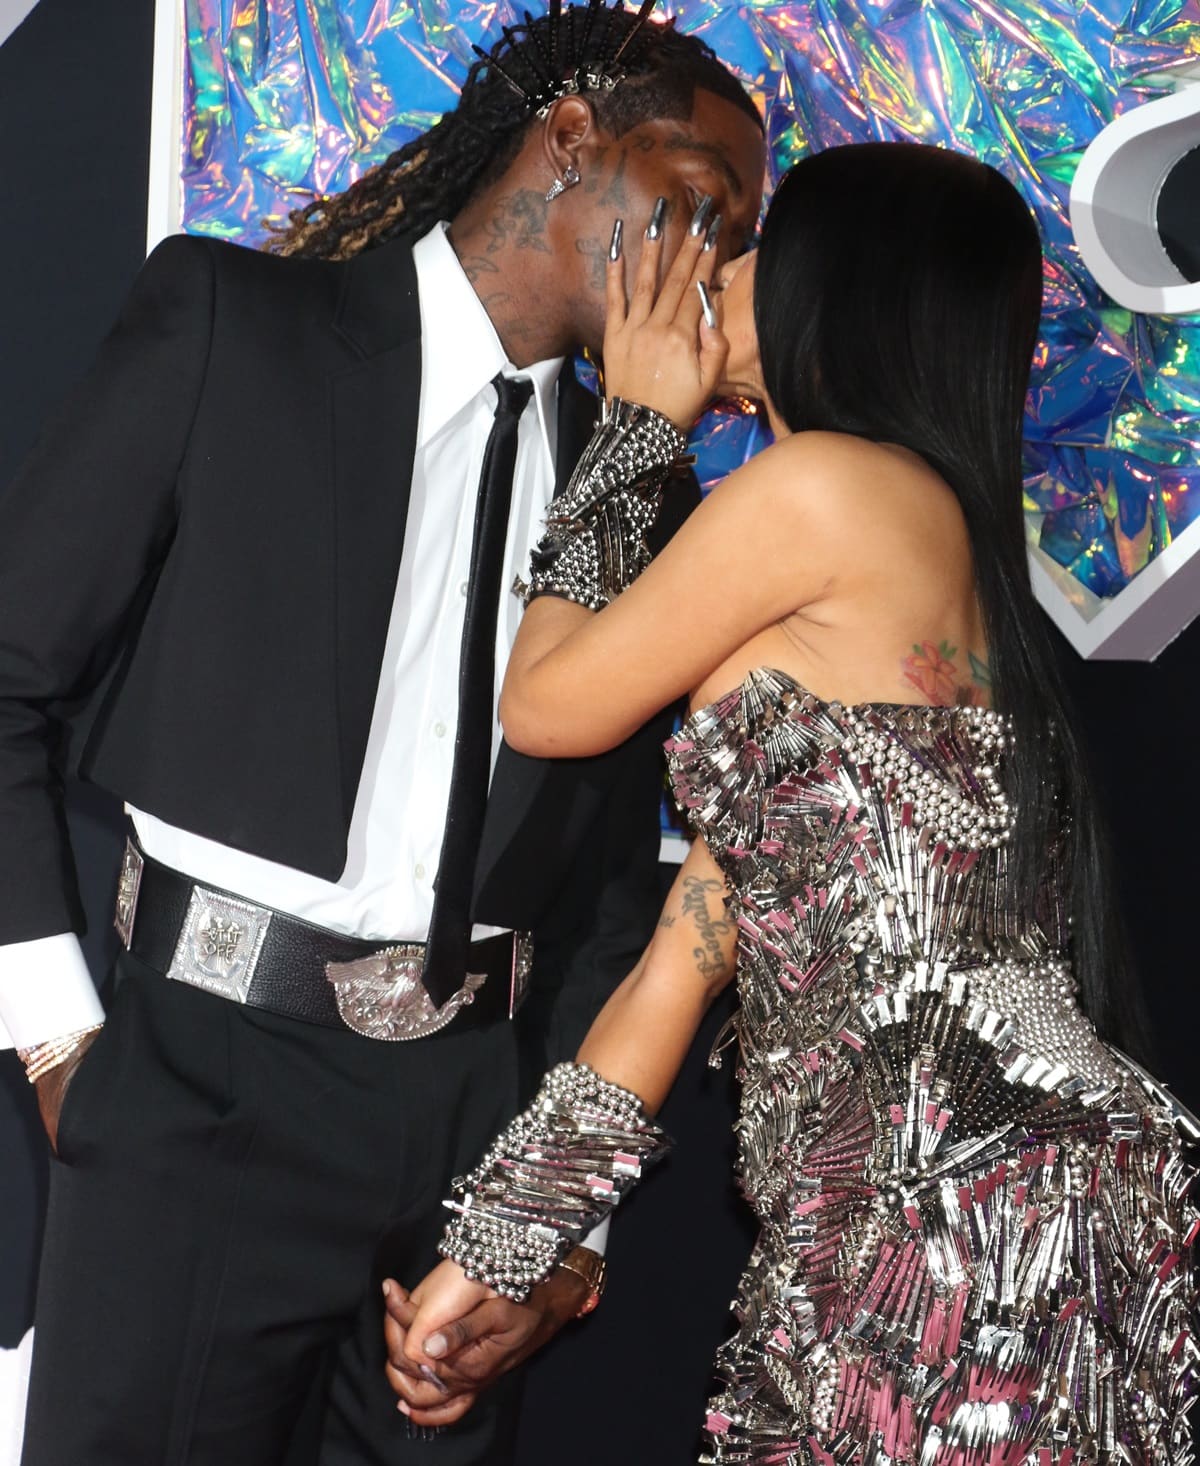 In a subtle nod to Cardi B's ensemble, Offset sported hair clips in his hairstyle, striking the perfect balance between complementing her look and maintaining his distinct style